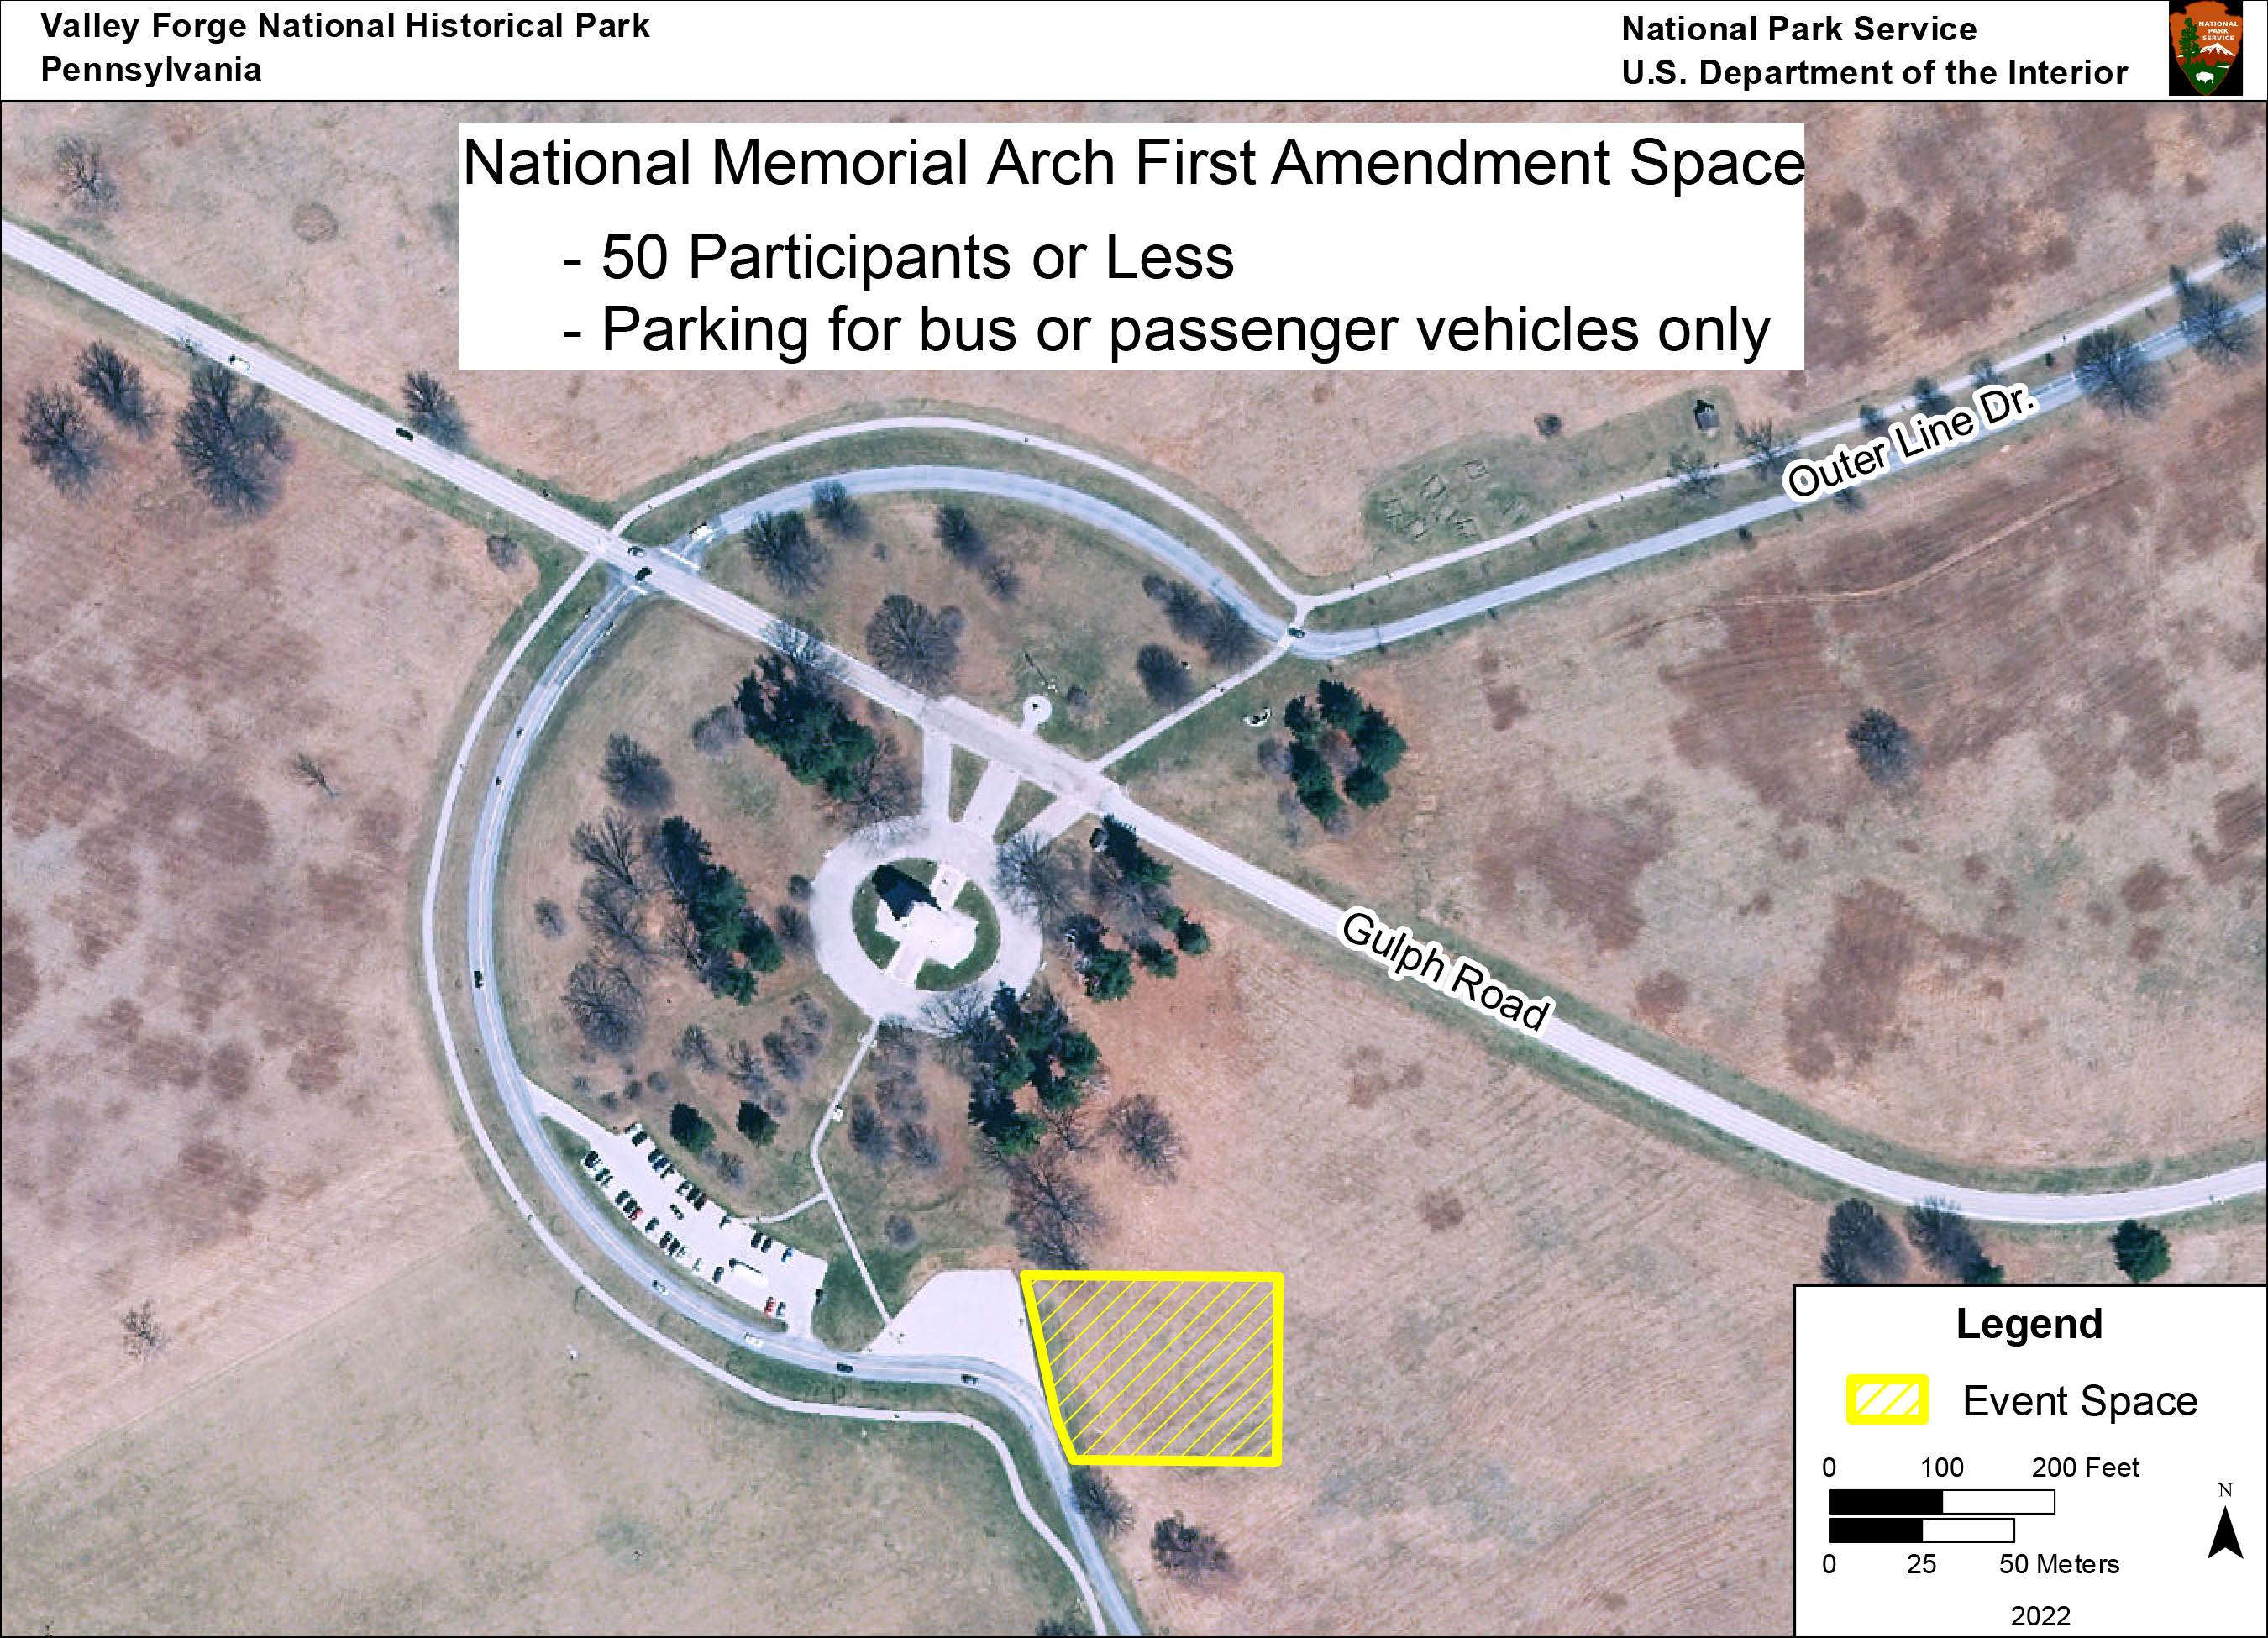 top down view of national memorial arch area. section east of parking lot is outlined and highlighted